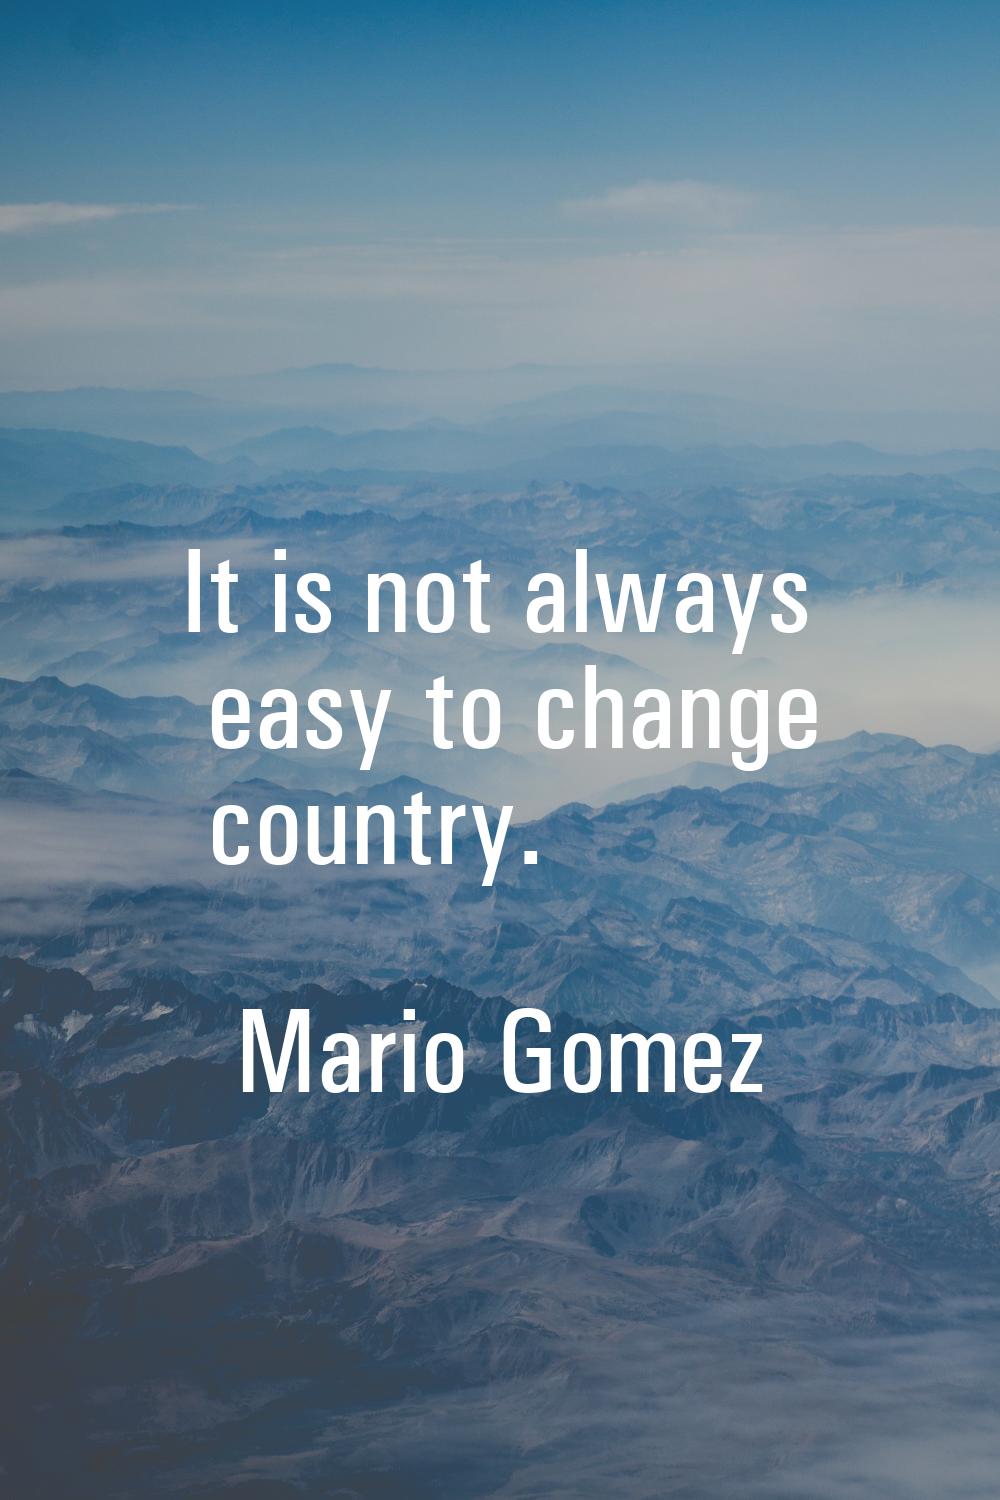 It is not always easy to change country.